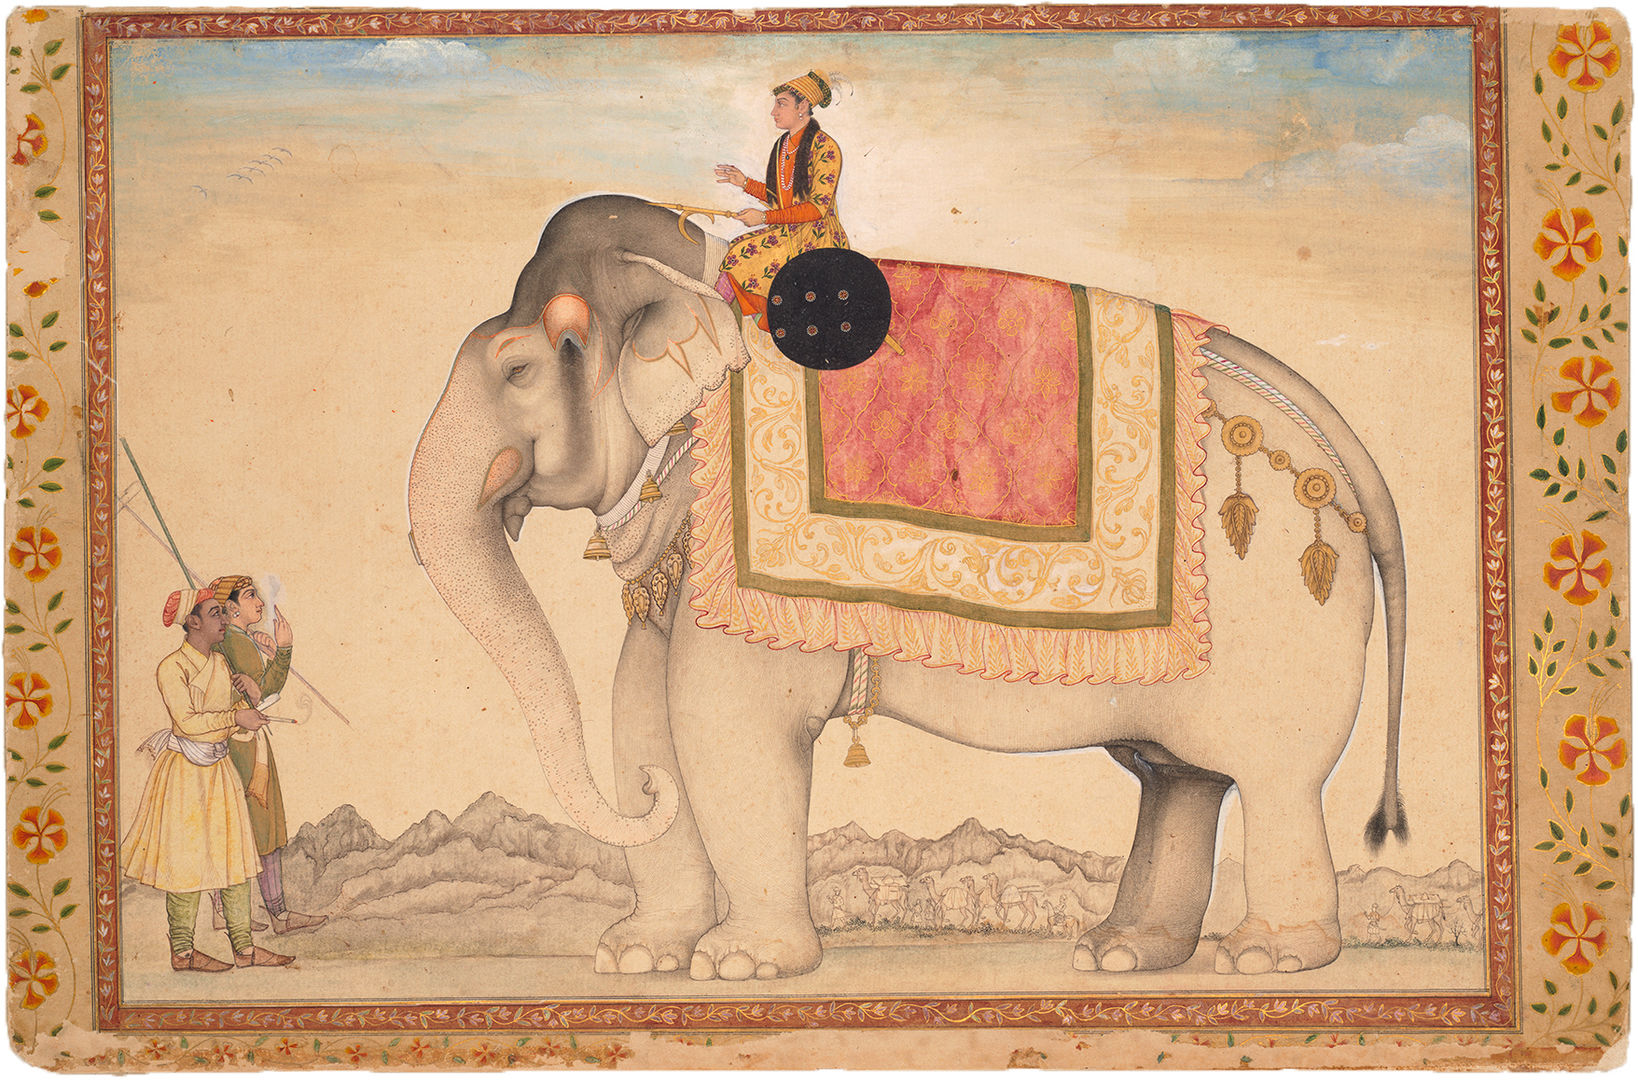 painting of an elephant in profile with a decorative cloth and a rider with two attendants to the left